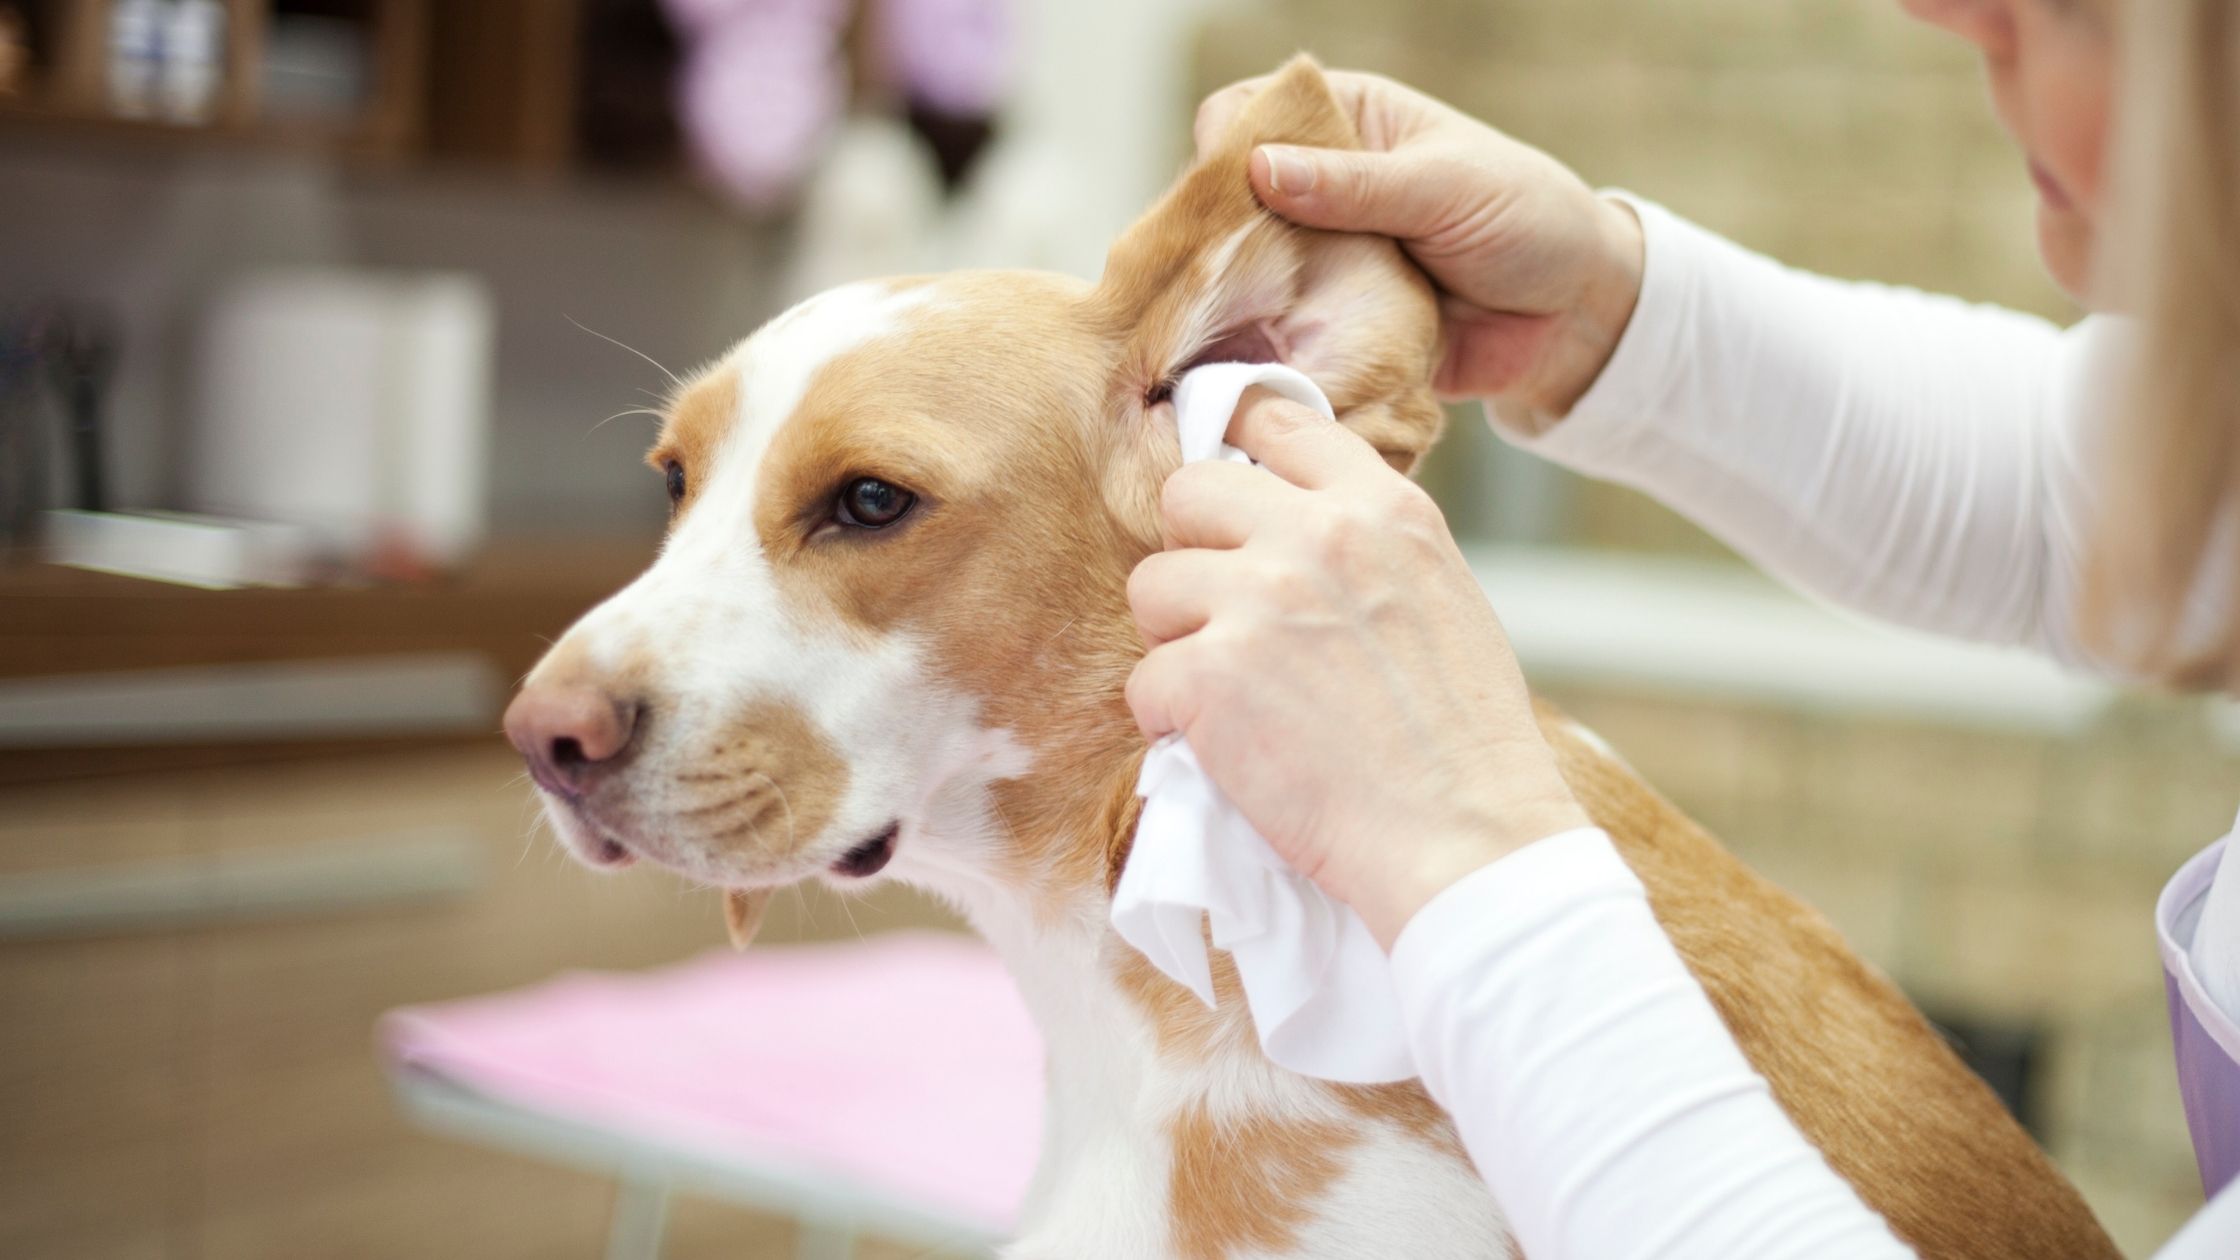 How To Use Essential Oils To Cure A Dog's Ear Infection